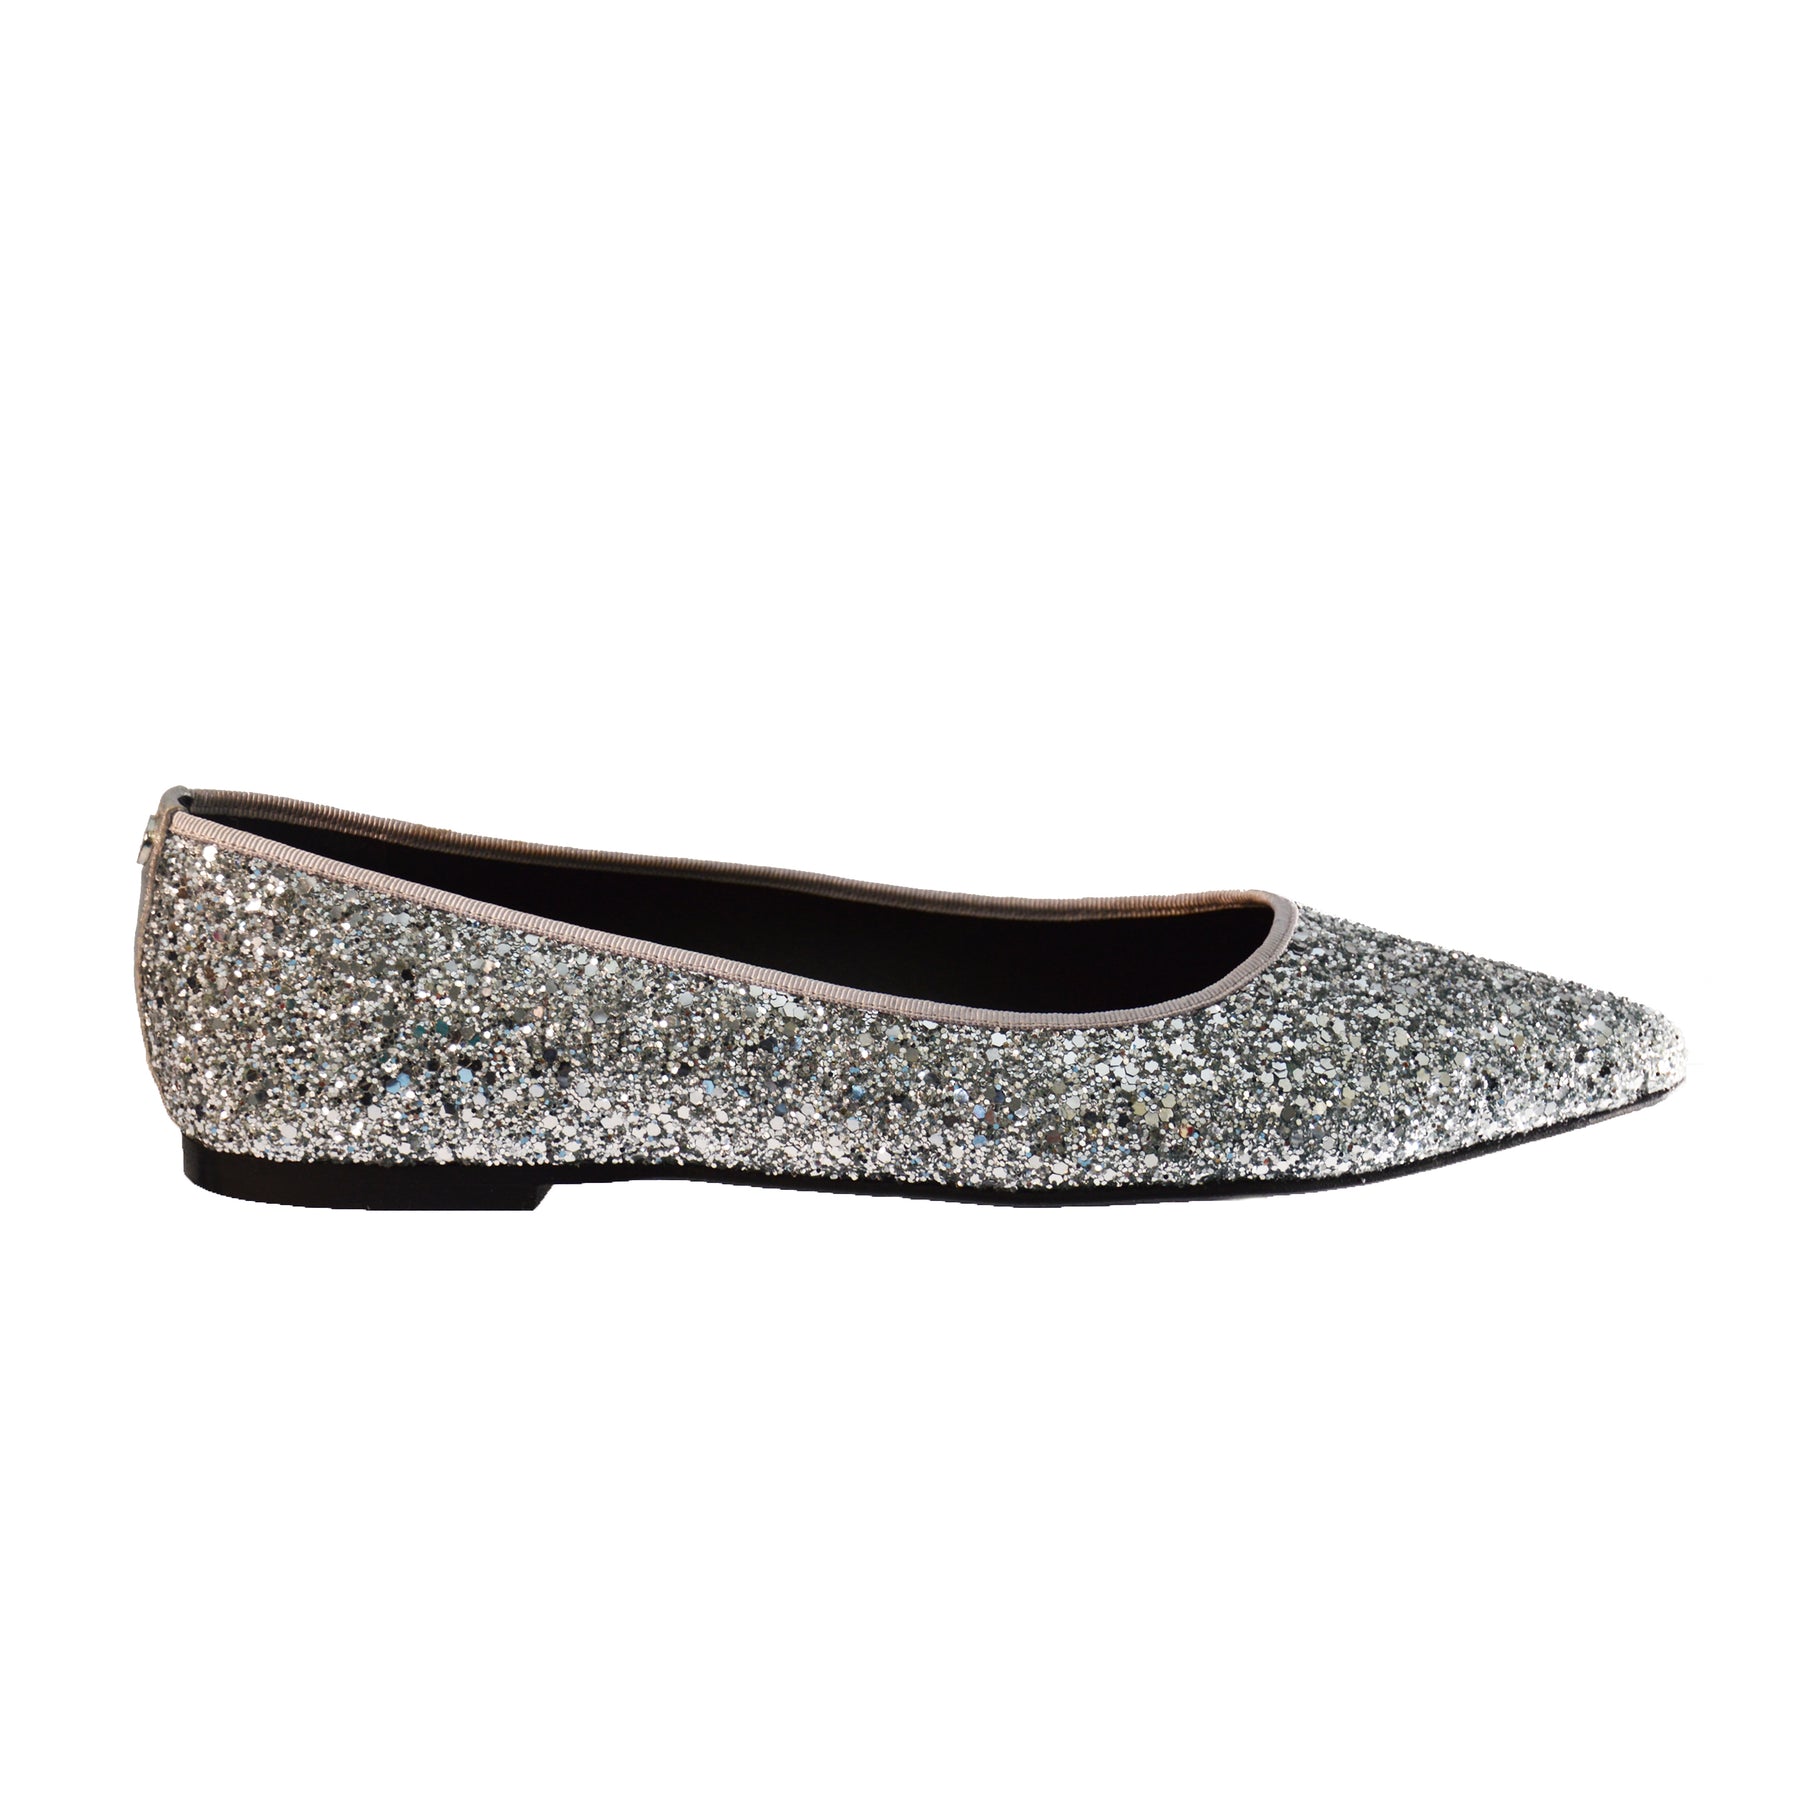 silver glitter ballet pump leather lined flat shoes.